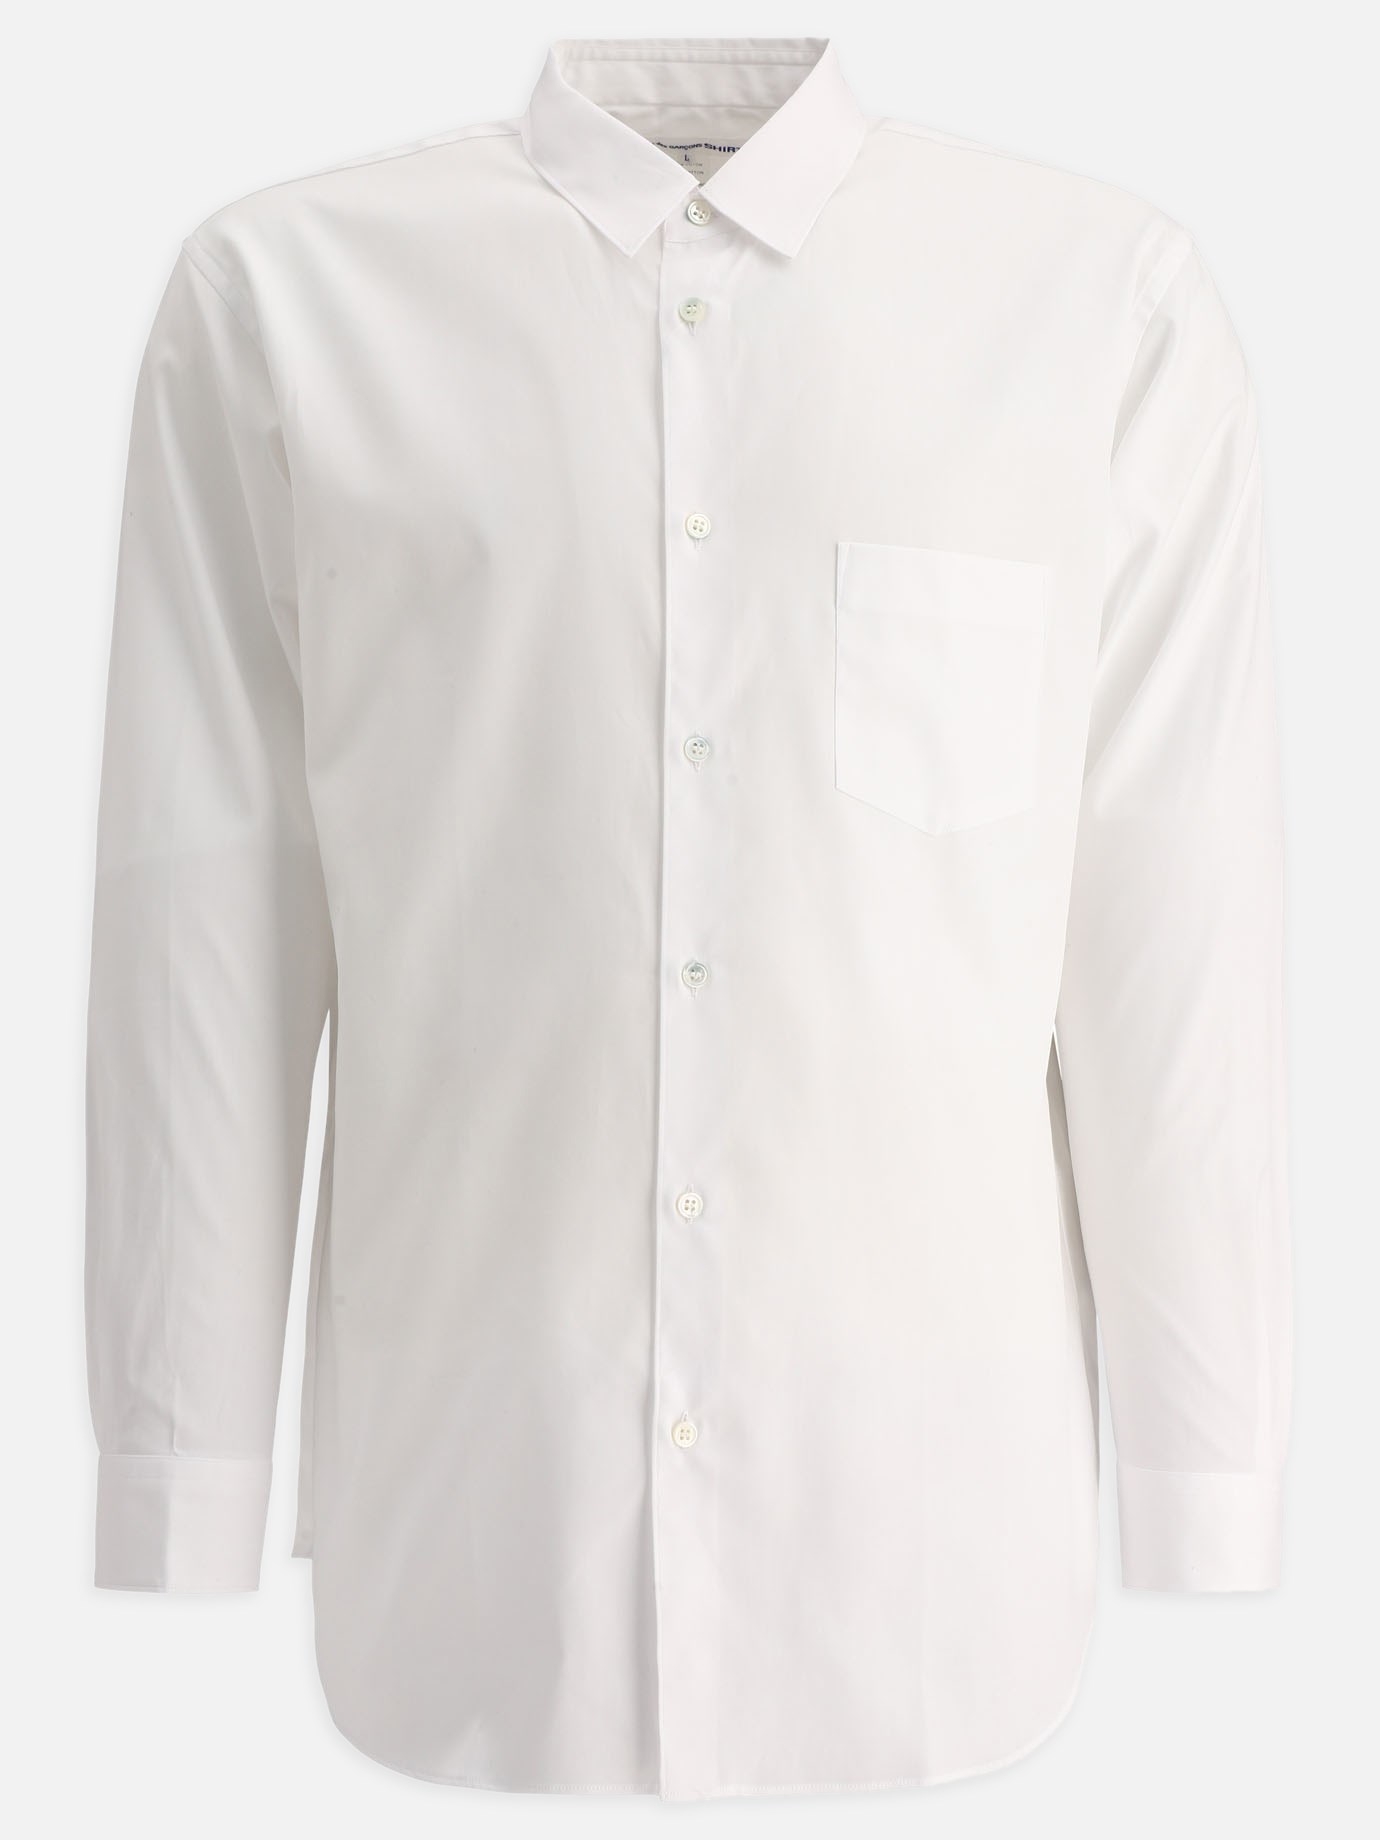 Oxford shirt with breast pocket